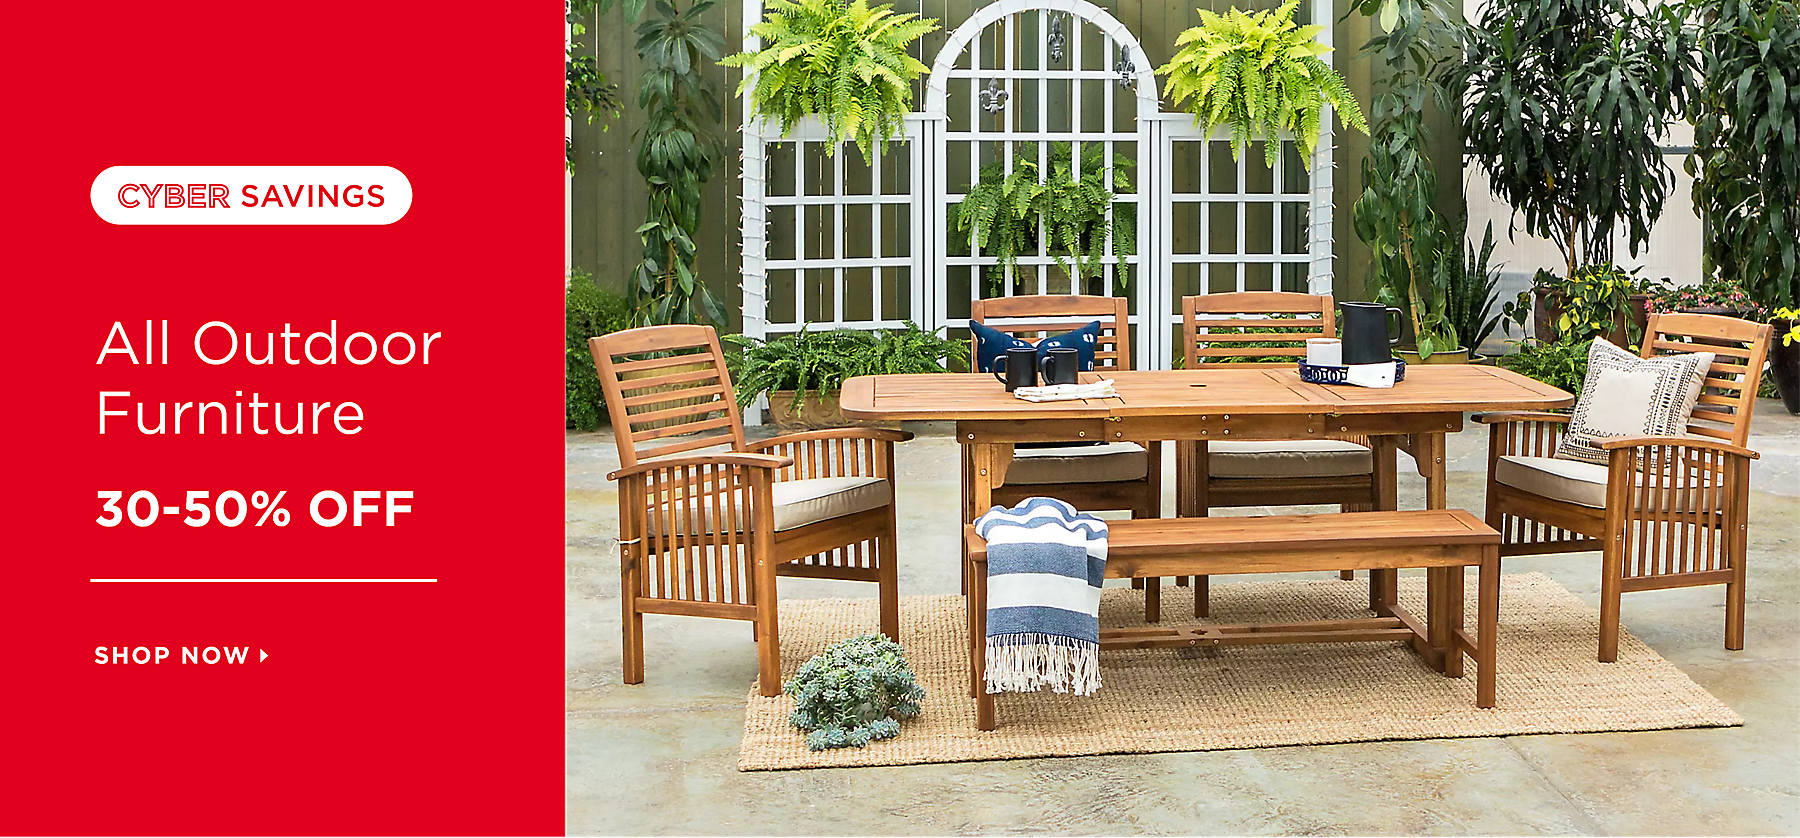 Cyber Savings Cyber Savings All Outdoor Furniture 30-50% Off Shop Now